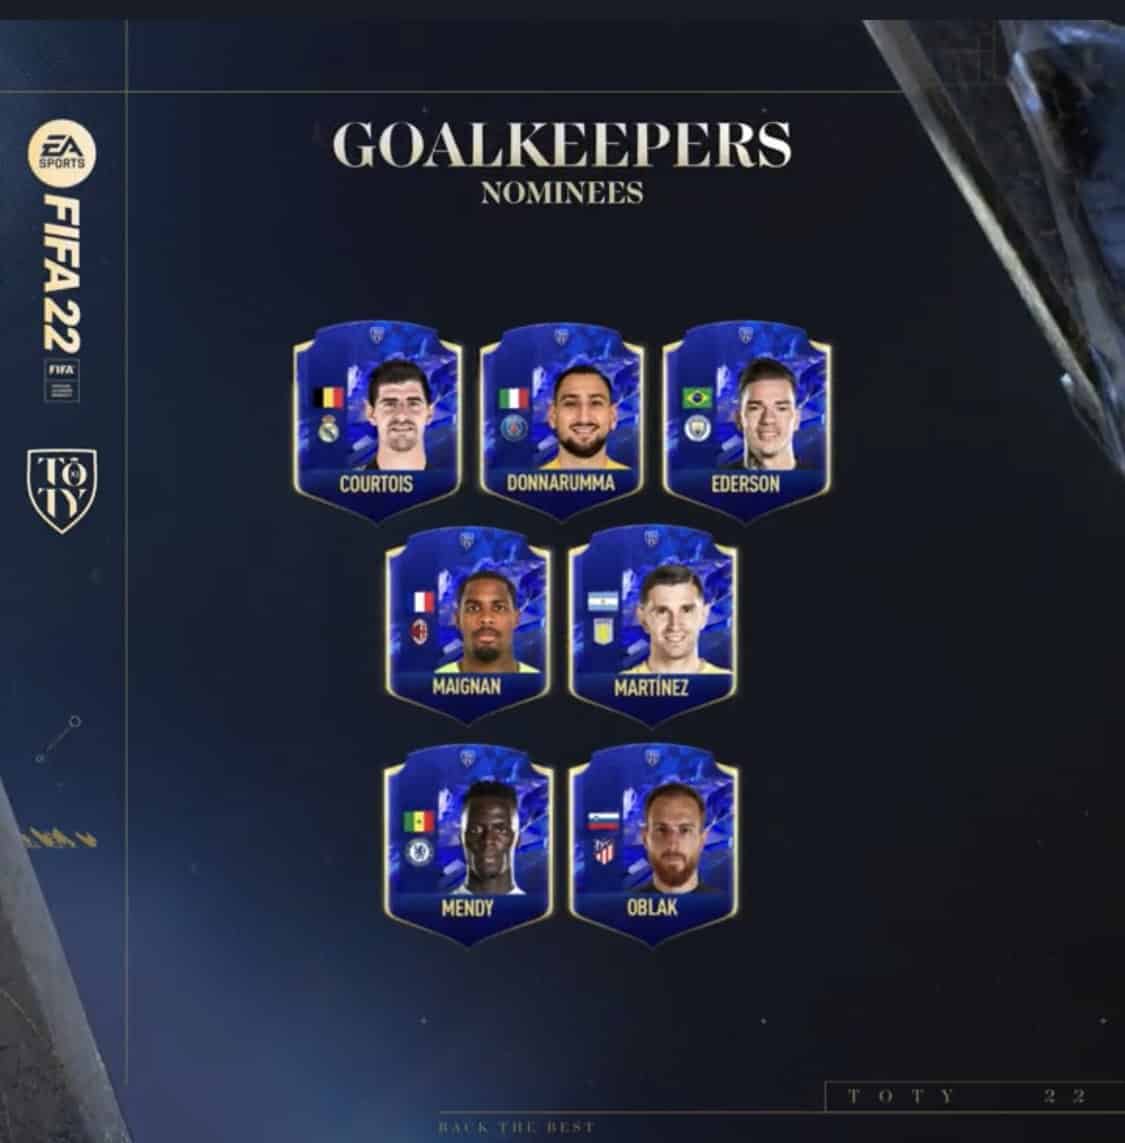 fifa 22 toty nominees for goalkeepers